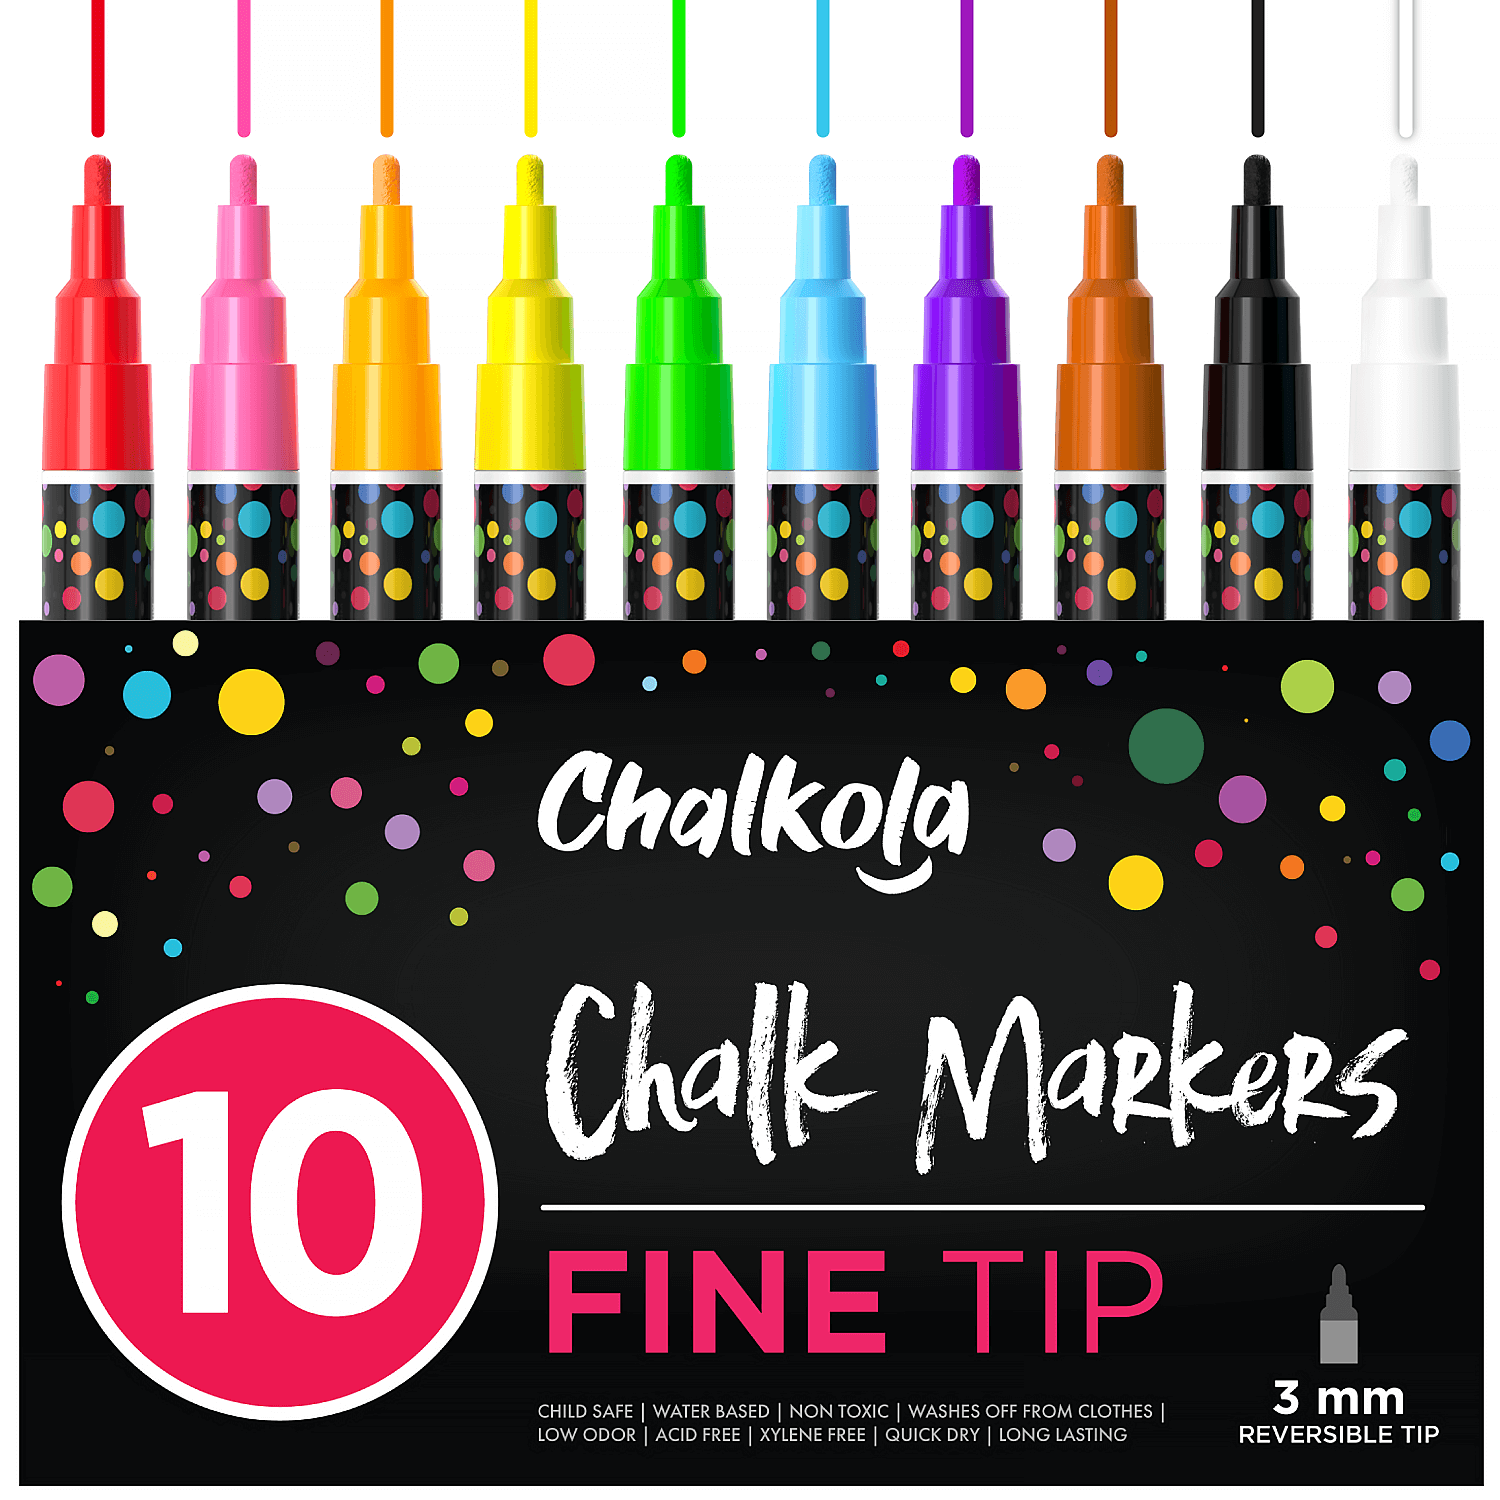 XMMSWDLA Bold Chalk Markers - Dry Erase Marker Pens - Liquid Chalk Markers  For Chalkboards, Signs, Windows, Blackboard, Glass, Mirrors - Chalkboard  Markers With Reversible Tip 